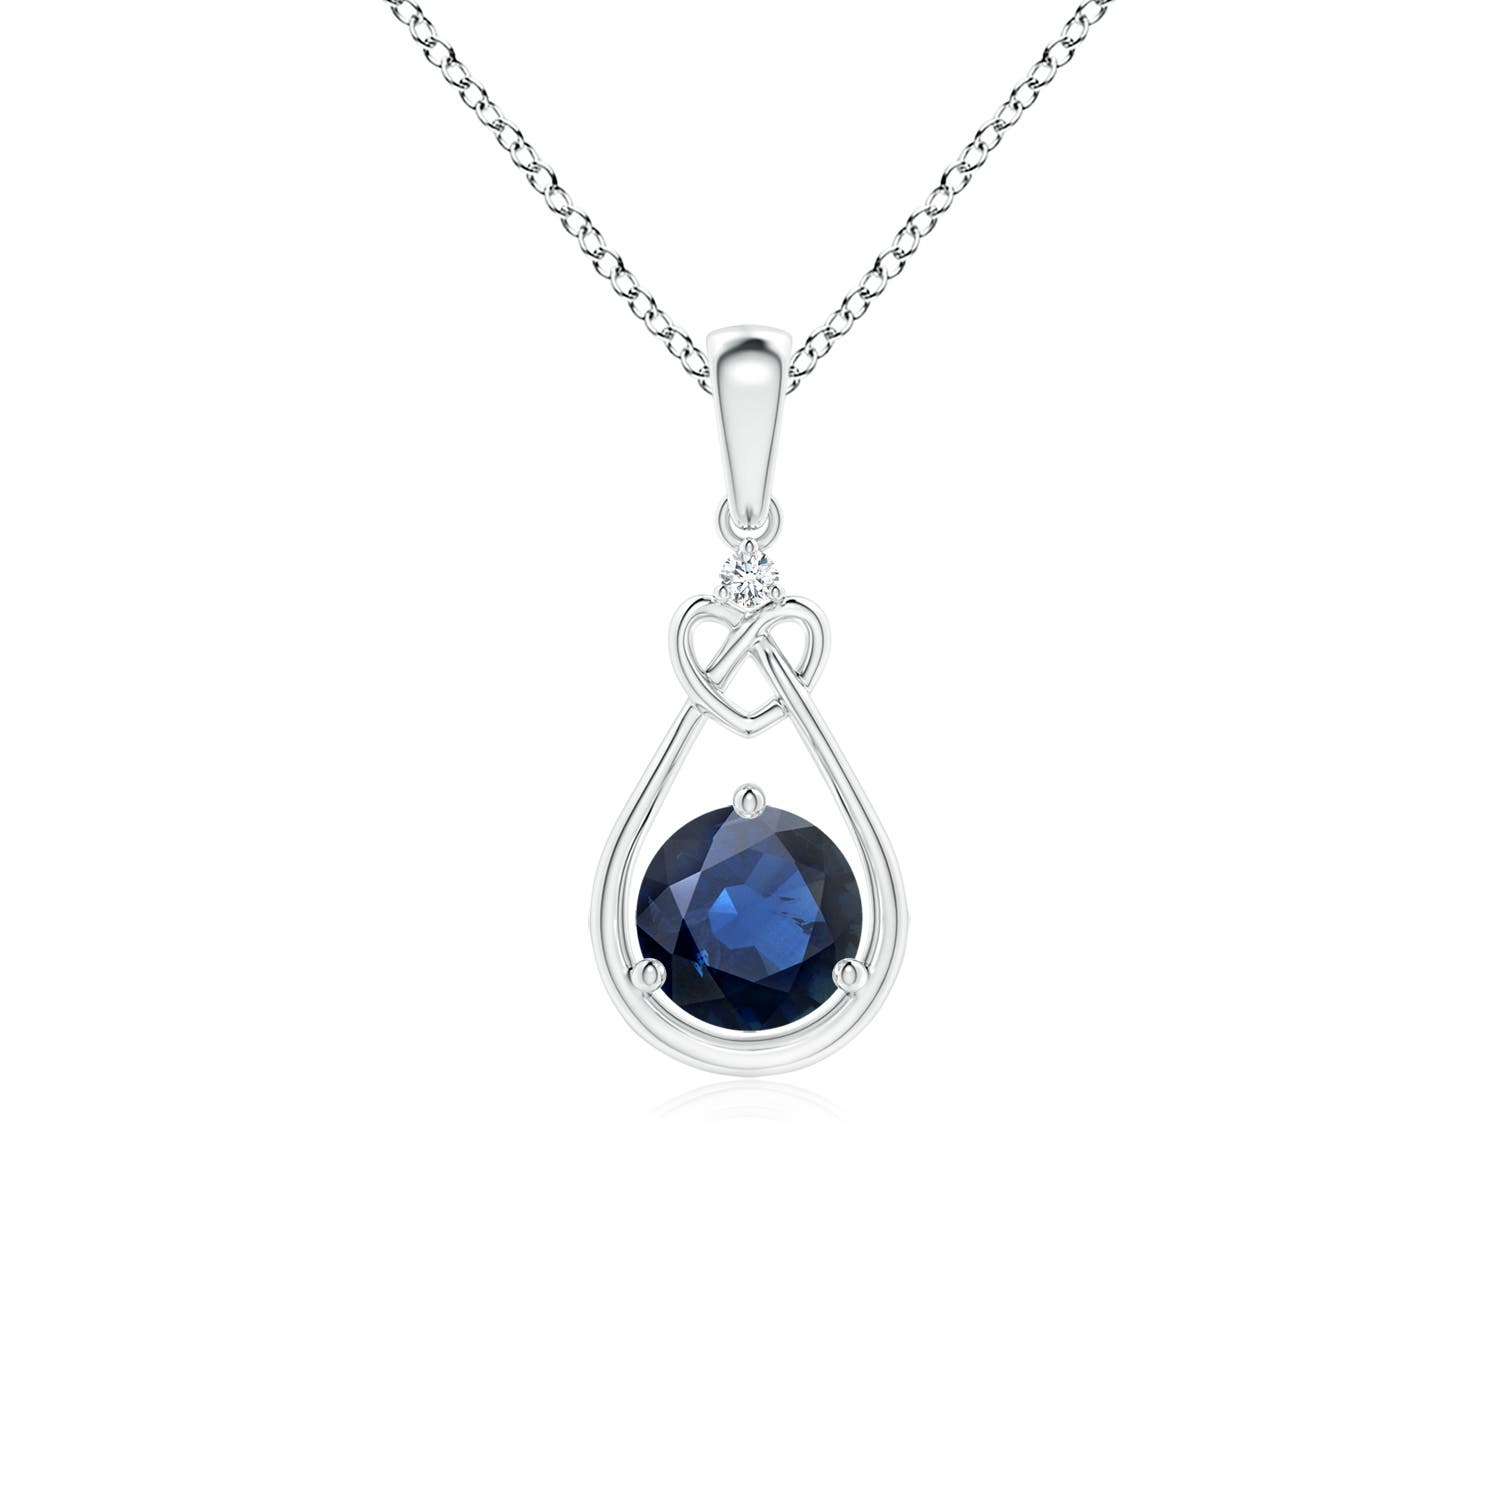 AA - Blue Sapphire / 0.61 CT / 14 KT White Gold